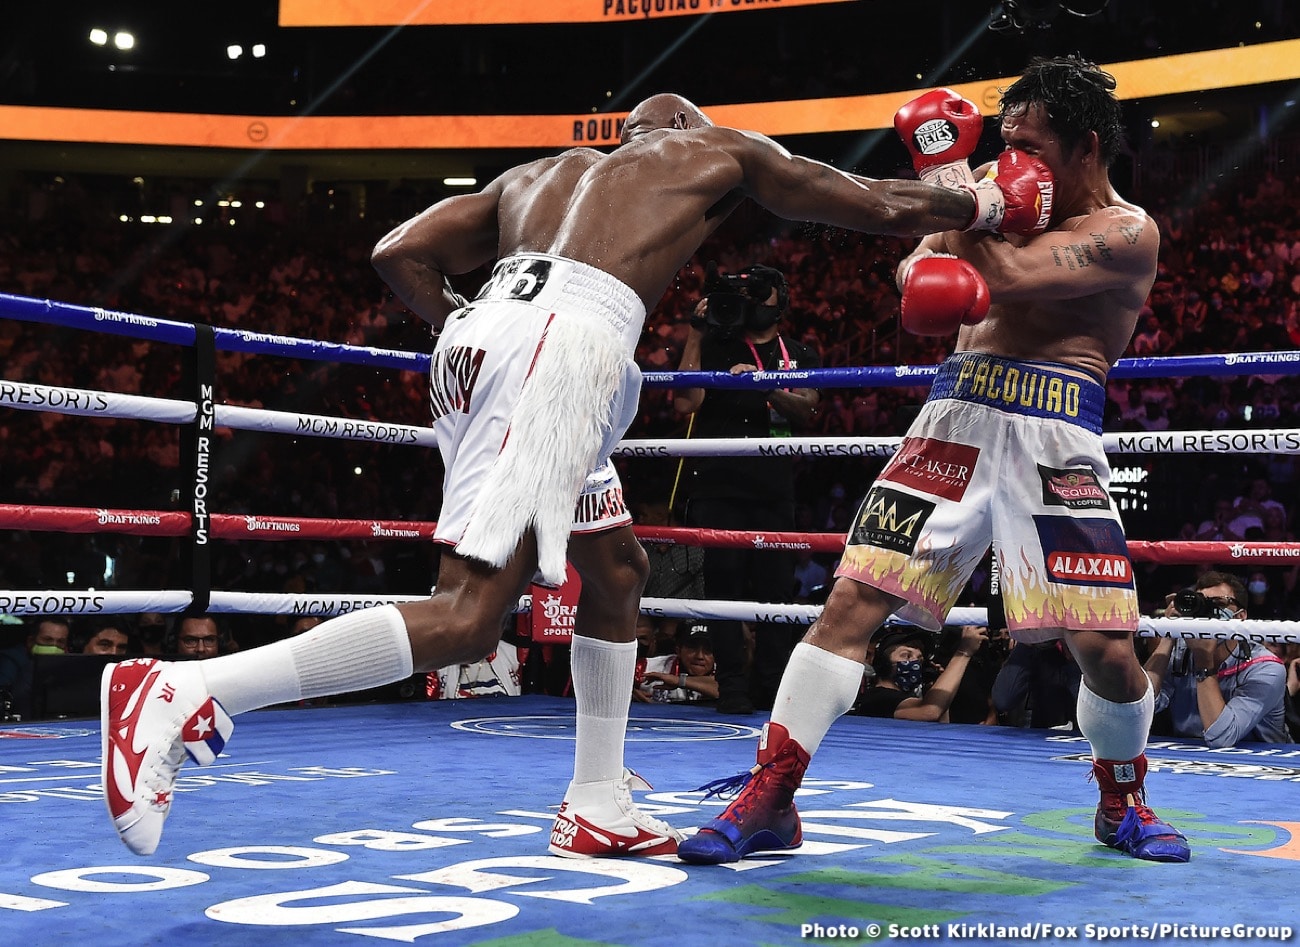 Full Fight Report: Yordenis Ugas Scores A Unanimous Decision Over Manny Pacquiao In An Entertaining Fight